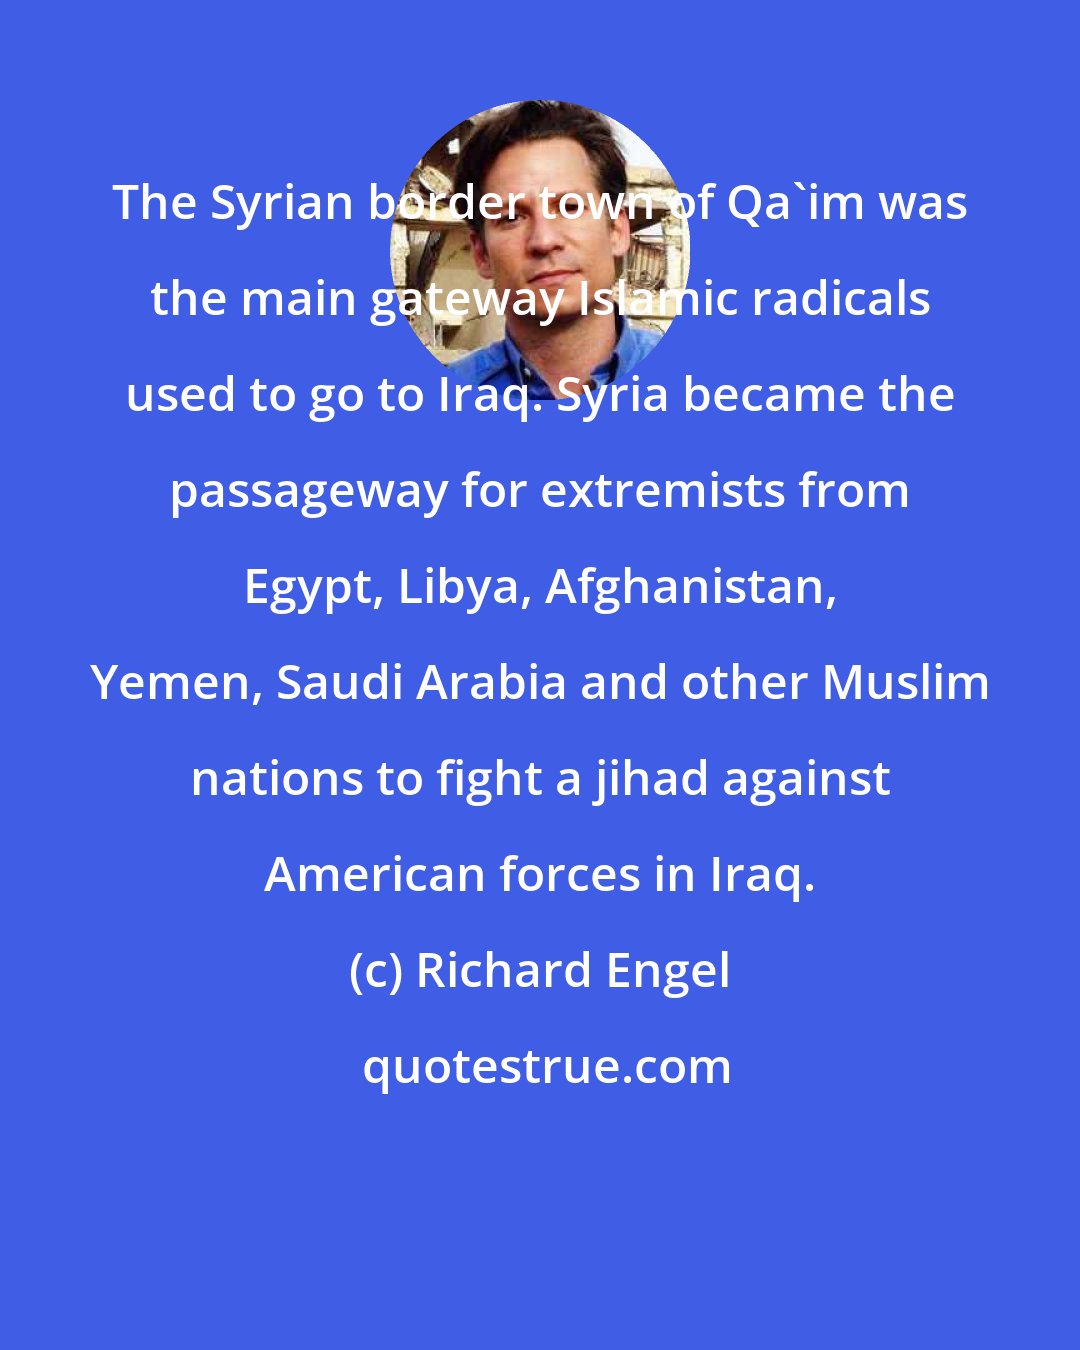 Richard Engel: The Syrian border town of Qa'im was the main gateway Islamic radicals used to go to Iraq. Syria became the passageway for extremists from Egypt, Libya, Afghanistan, Yemen, Saudi Arabia and other Muslim nations to fight a jihad against American forces in Iraq.